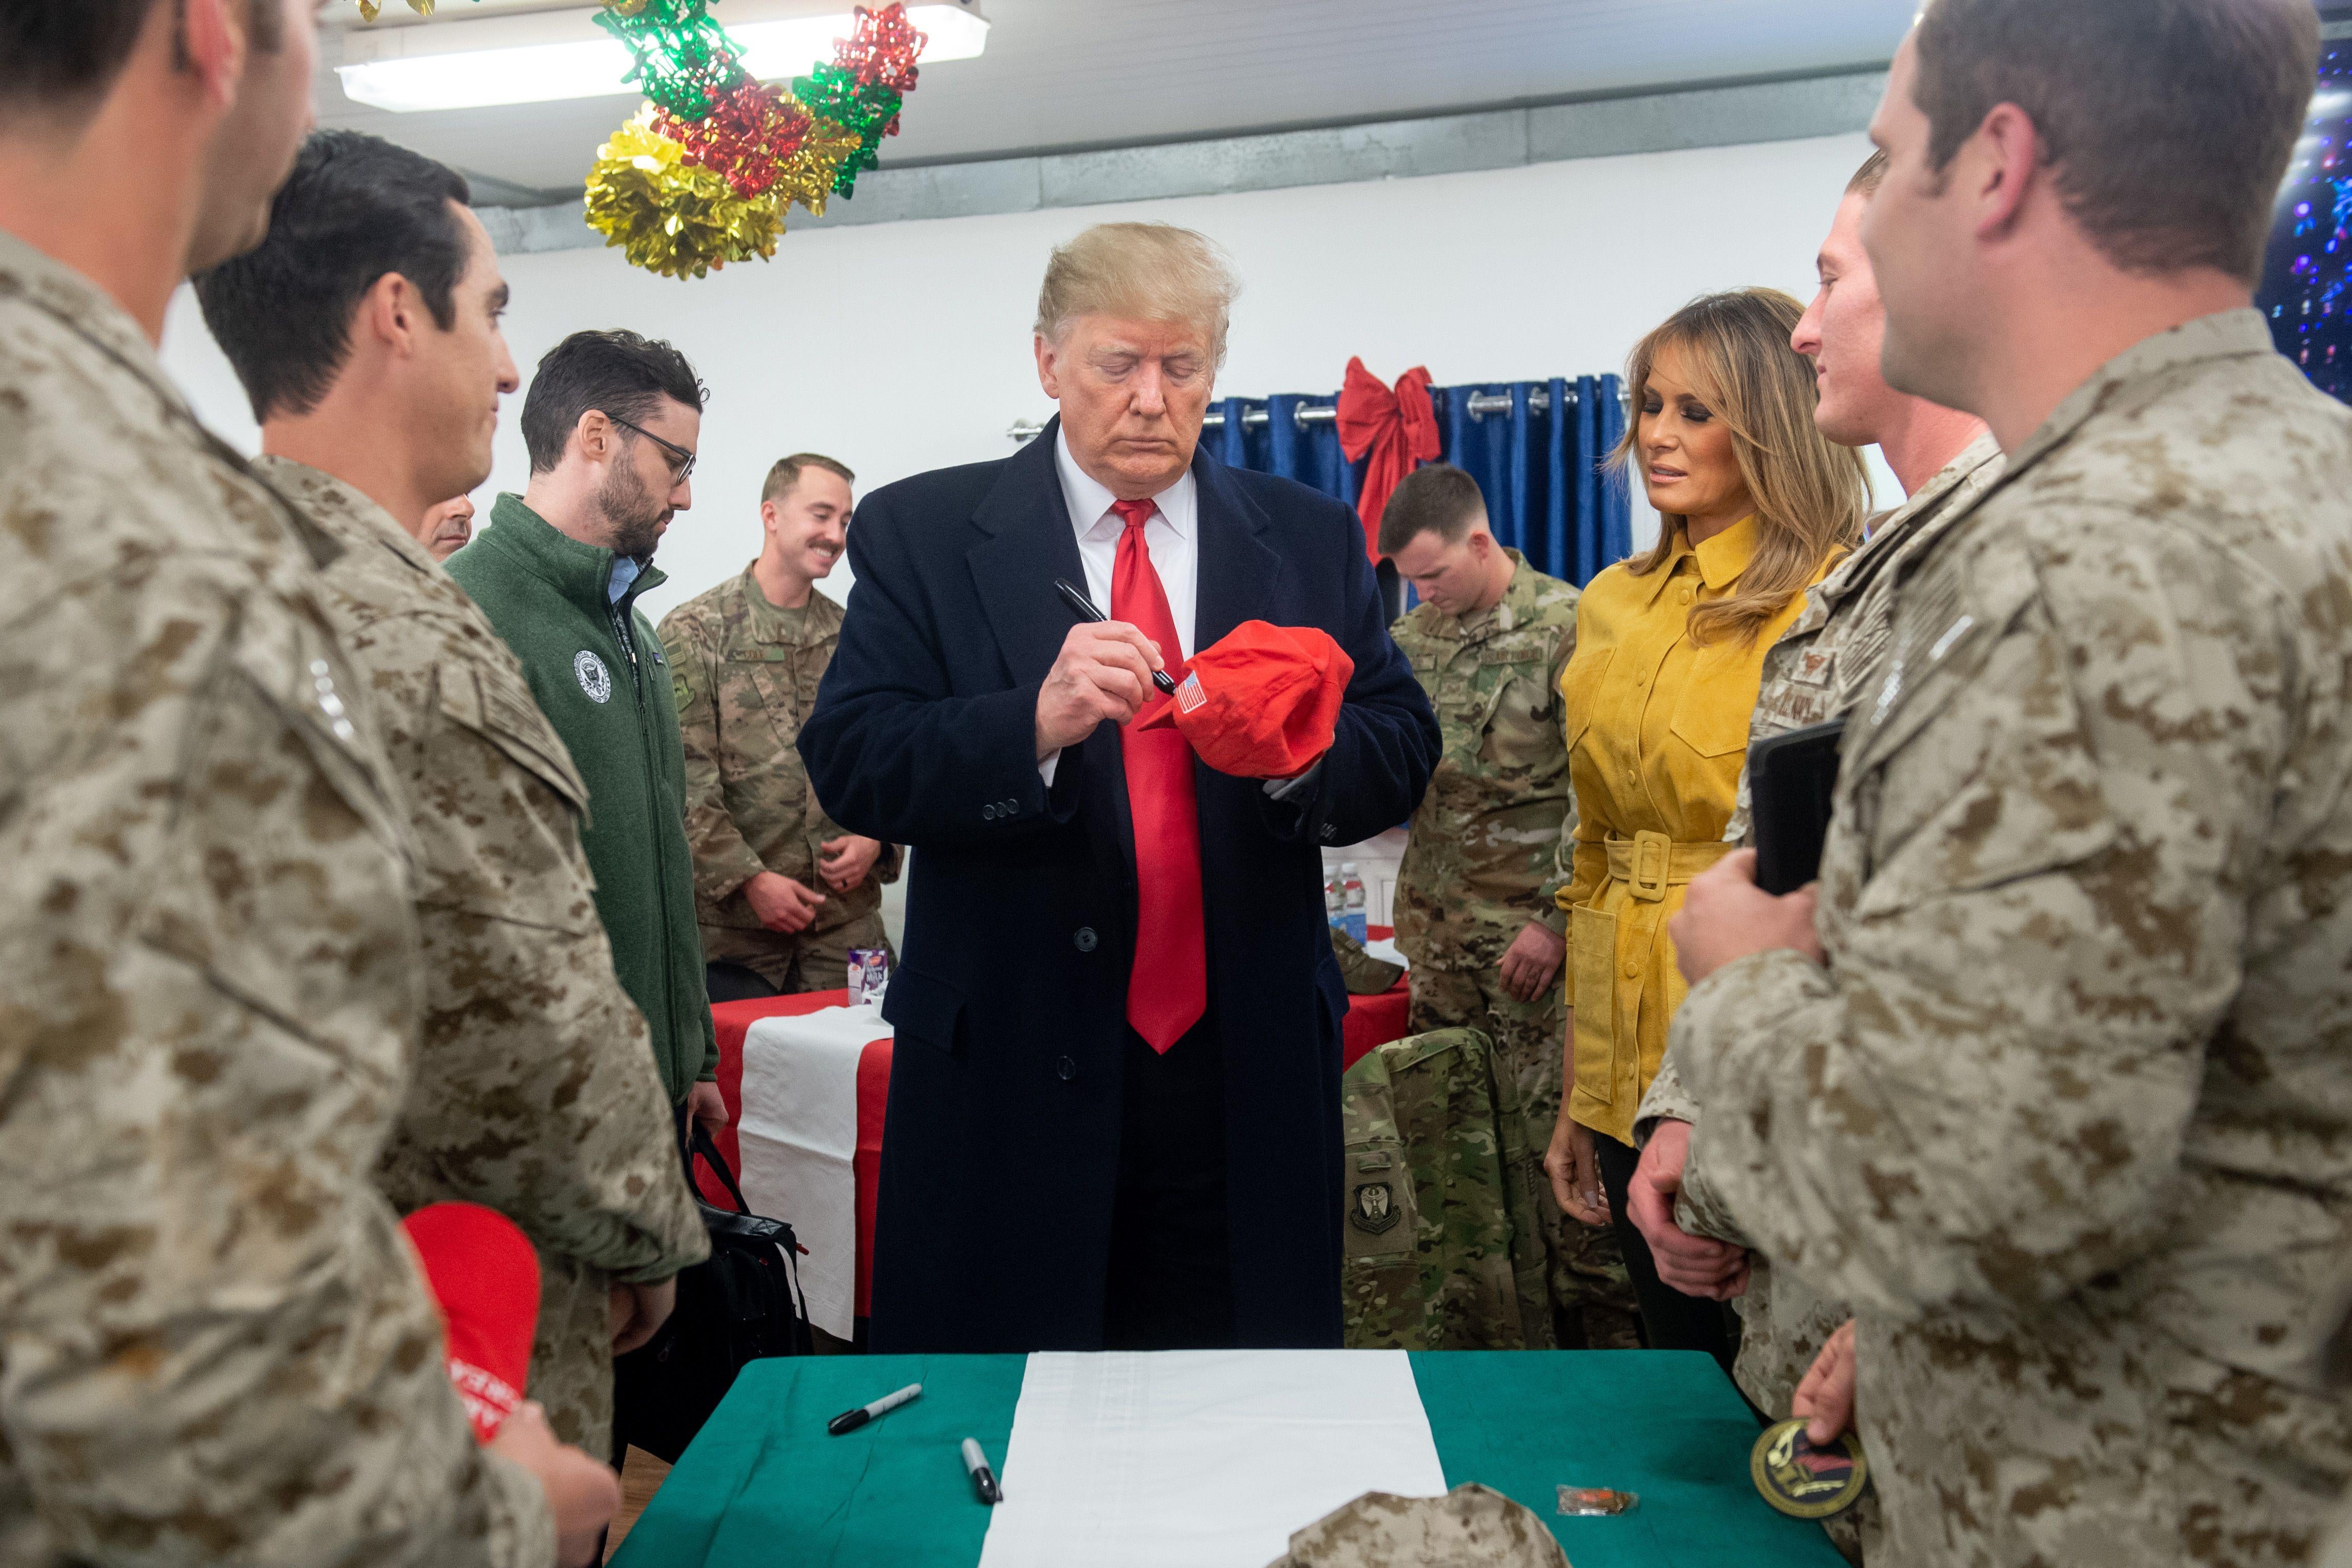 President Donald Trump signs a hat as First Lady Melania Trump looks on as they greet members of the U.S. military during an unannounced trip to Al Asad Air Base in Iraq on December 26, 2018.